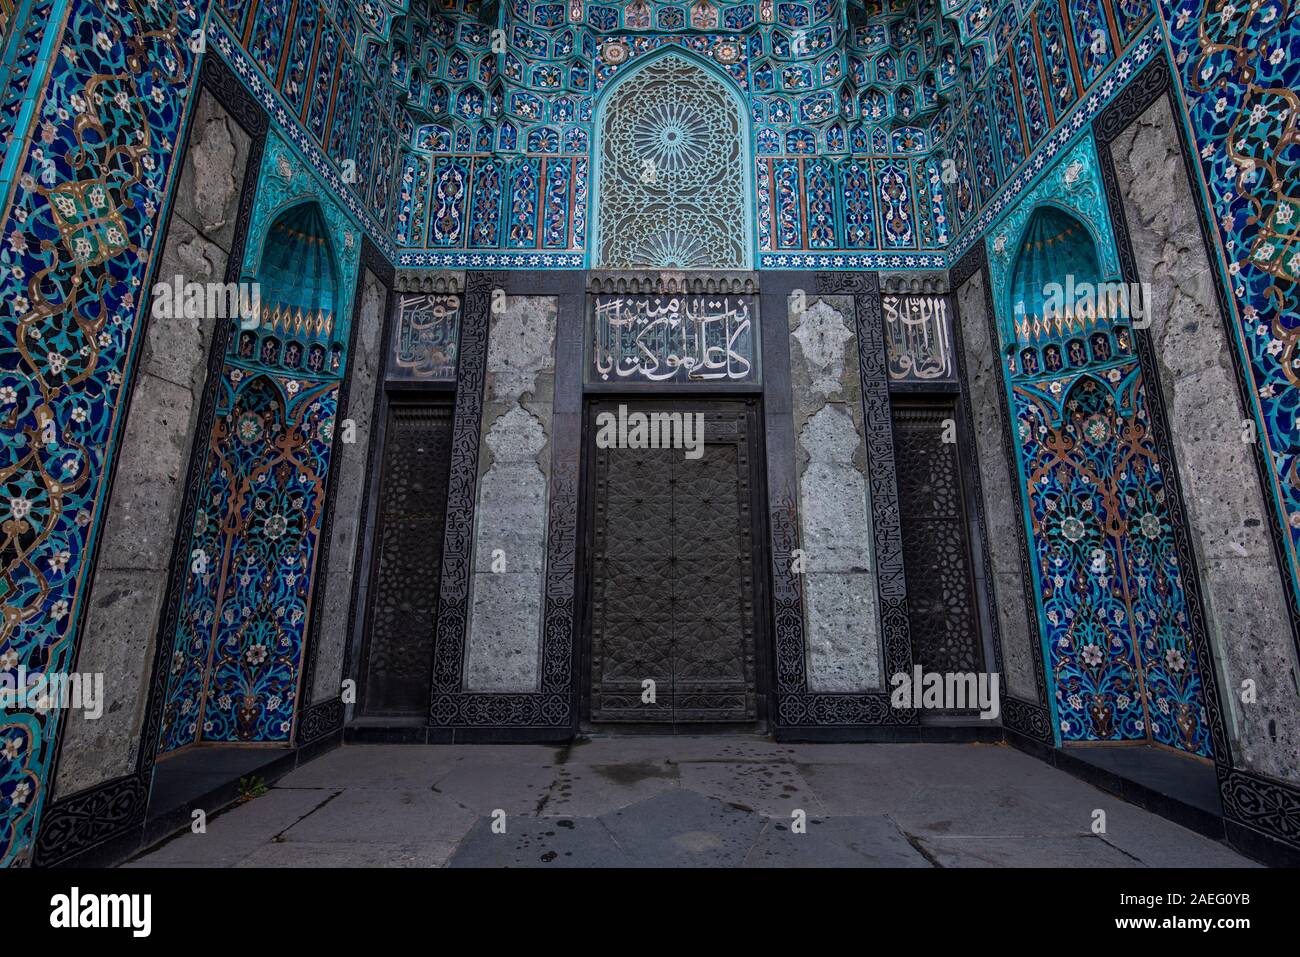 Mosaic decoration of entrance of one portal at Saint Petersburg Mosque in Russia Stock Photo